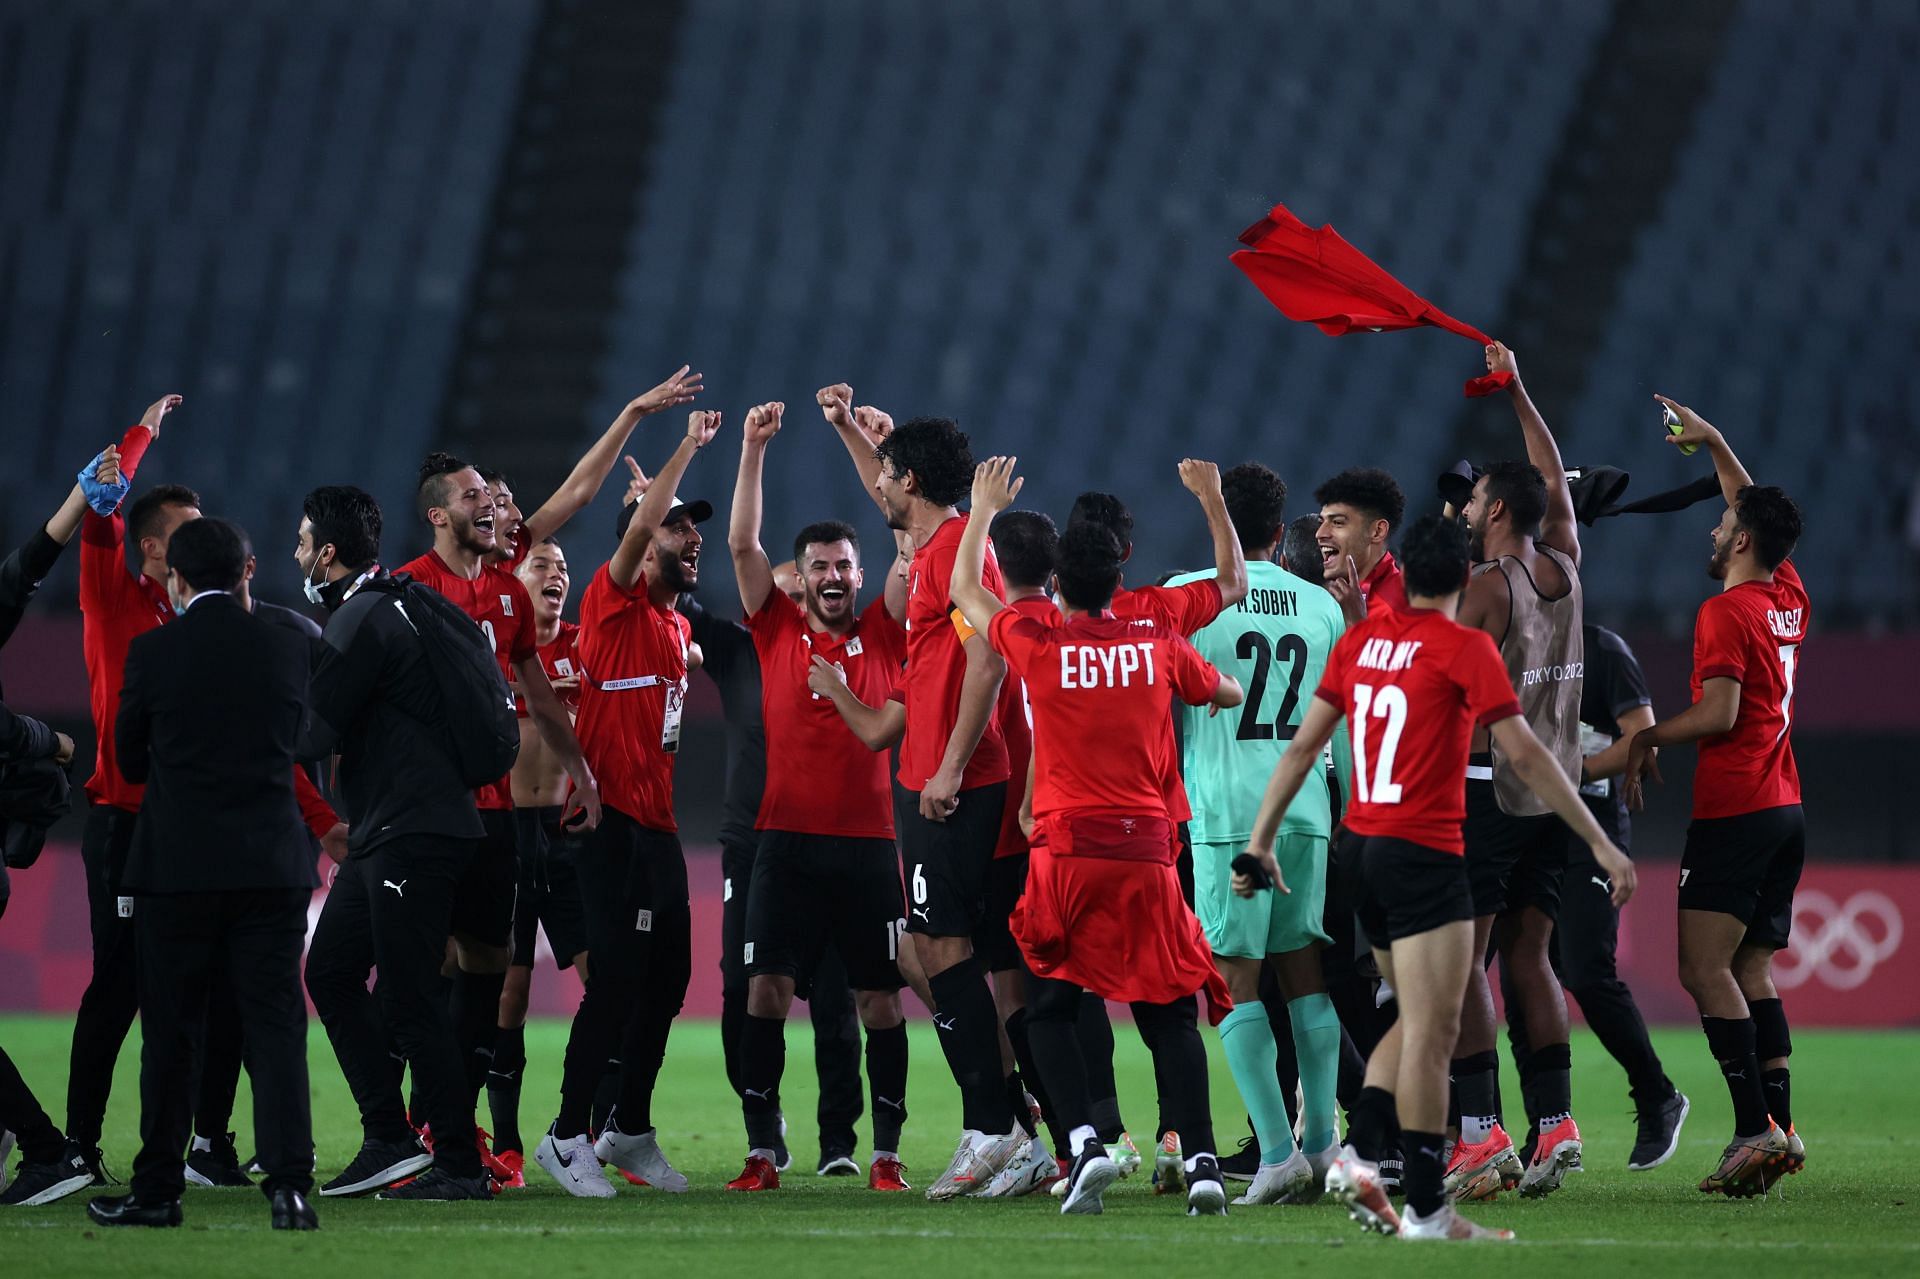 Egypt face Morocco in the quarterfinal on Sunday